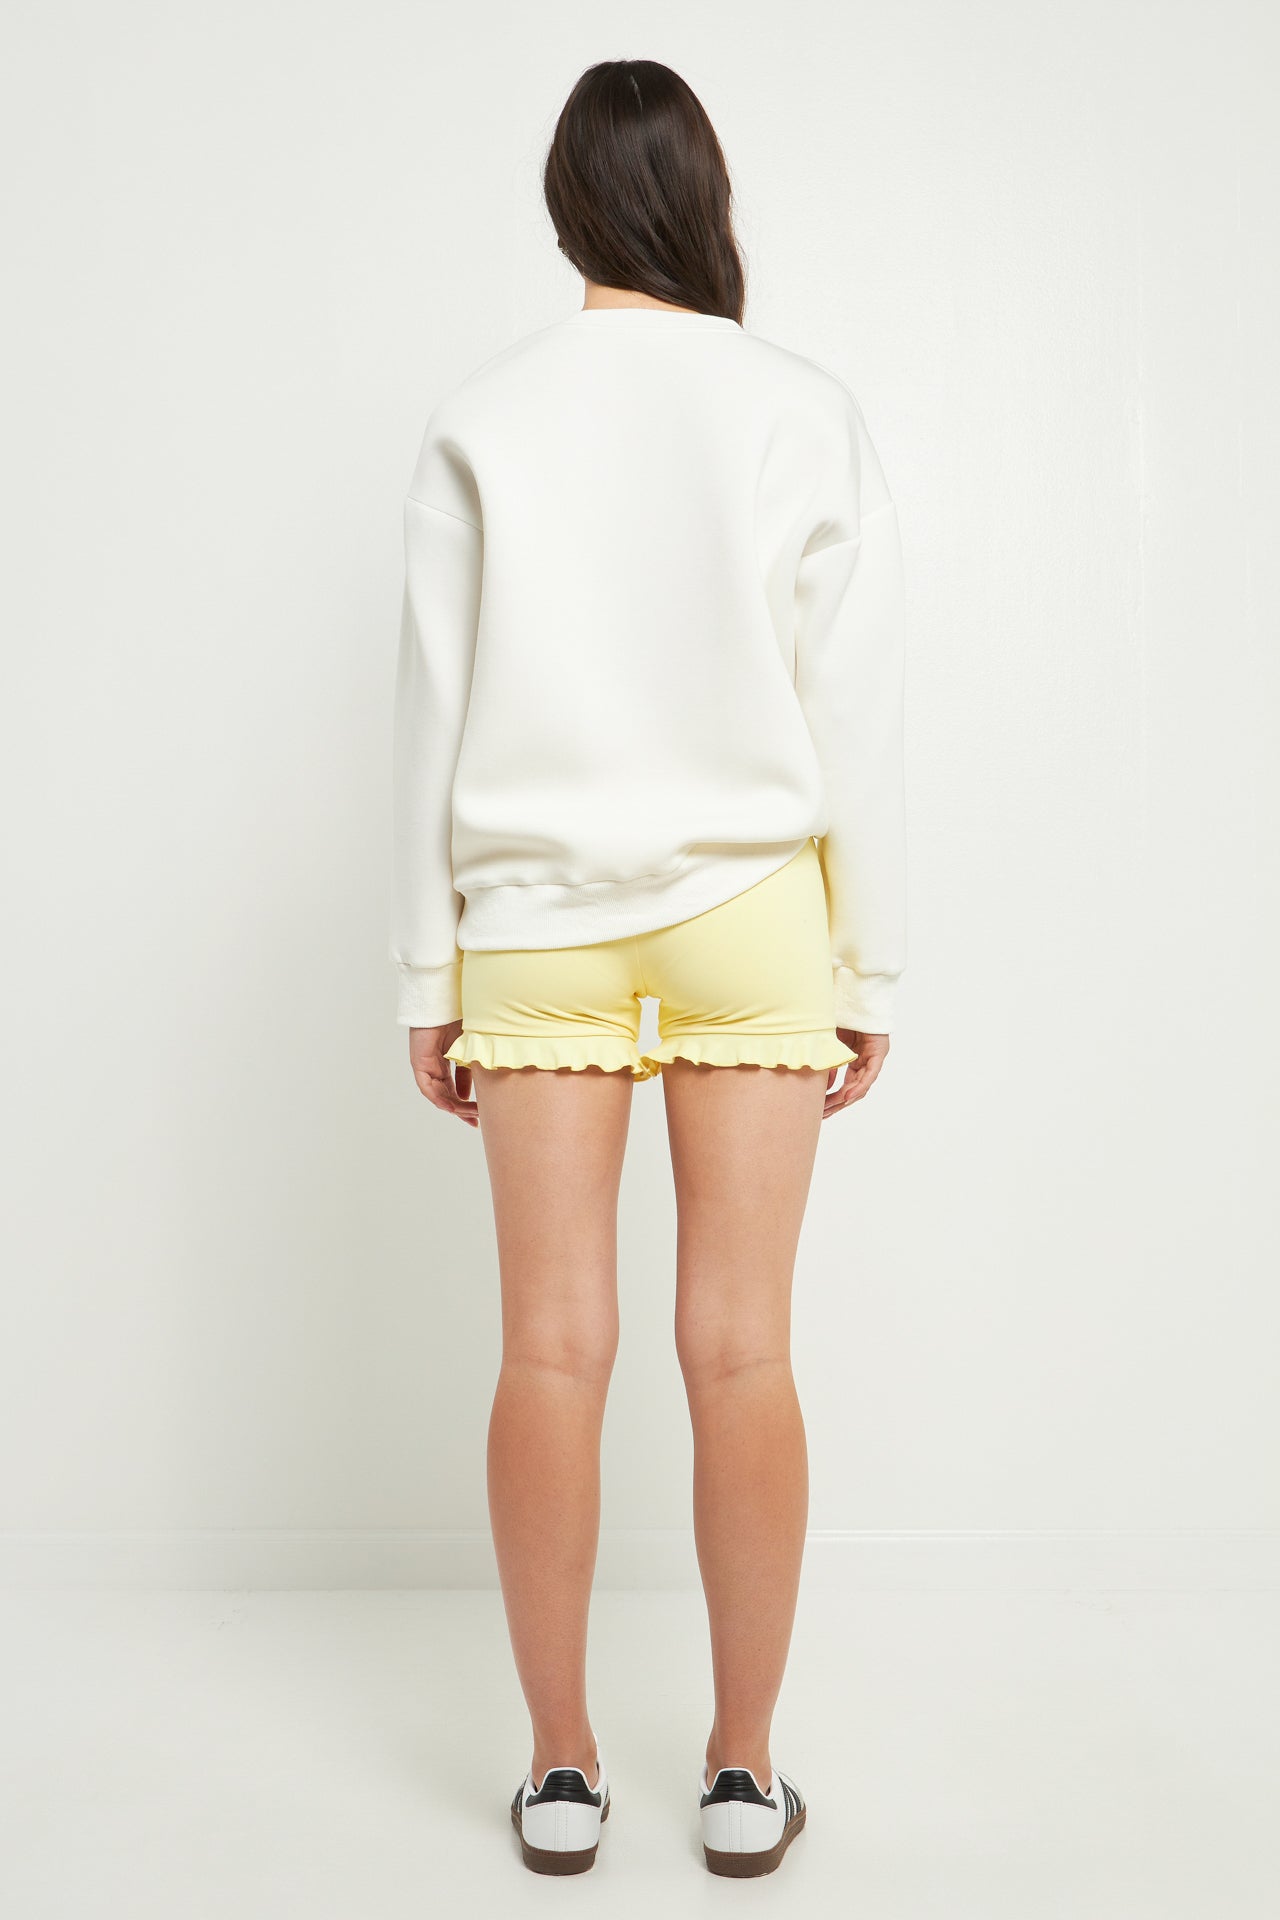 GREY LAB - Biker Shorts with Ruffle - SHORTS available at Objectrare